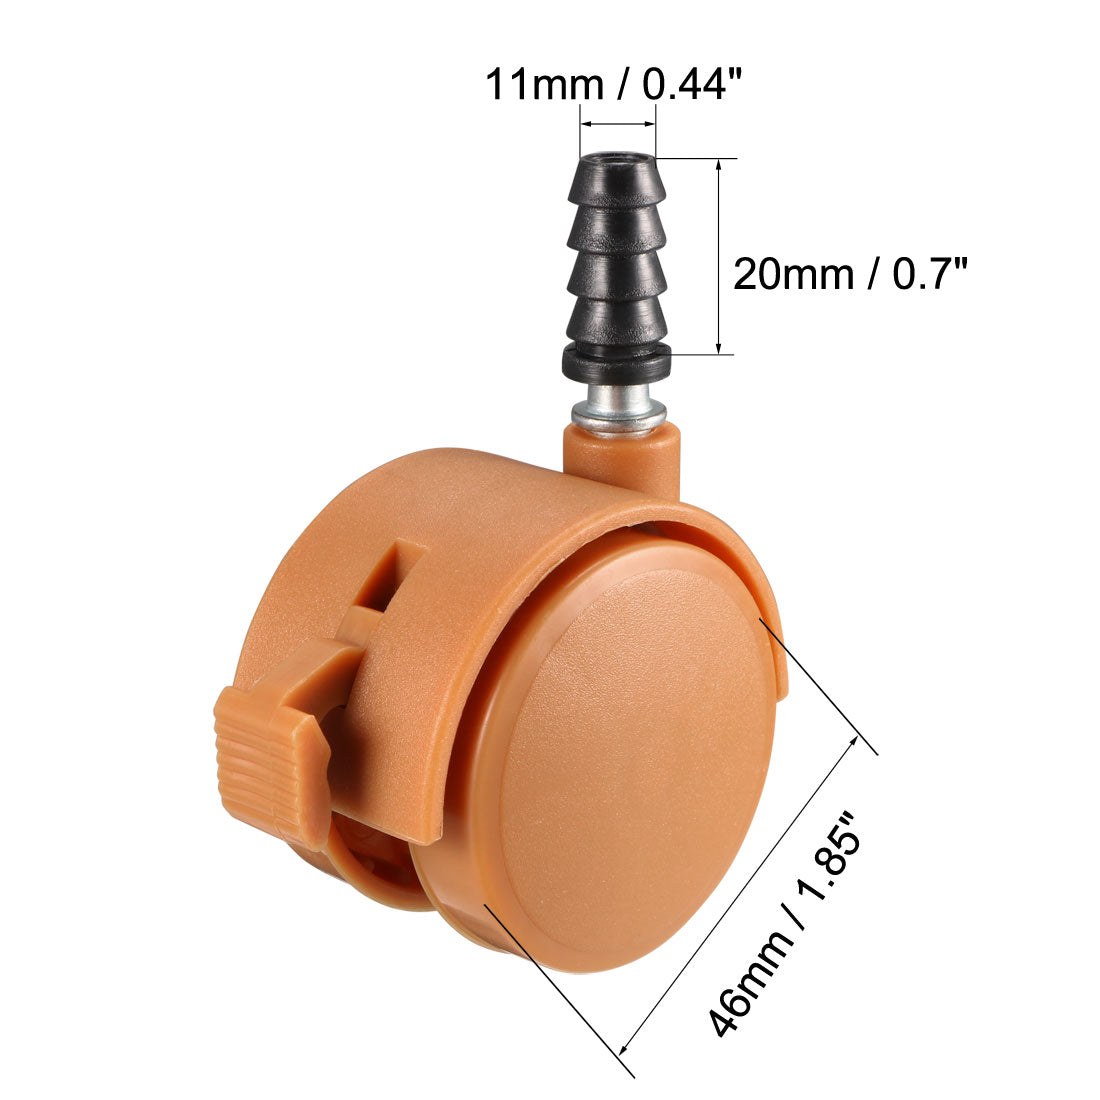 uxcell Uxcell 1.85 Inch Swivel Caster Wheels Grip Neck Stem Caster Brown Furniture Wheel with Brake and Mounting Socket, 4pcs